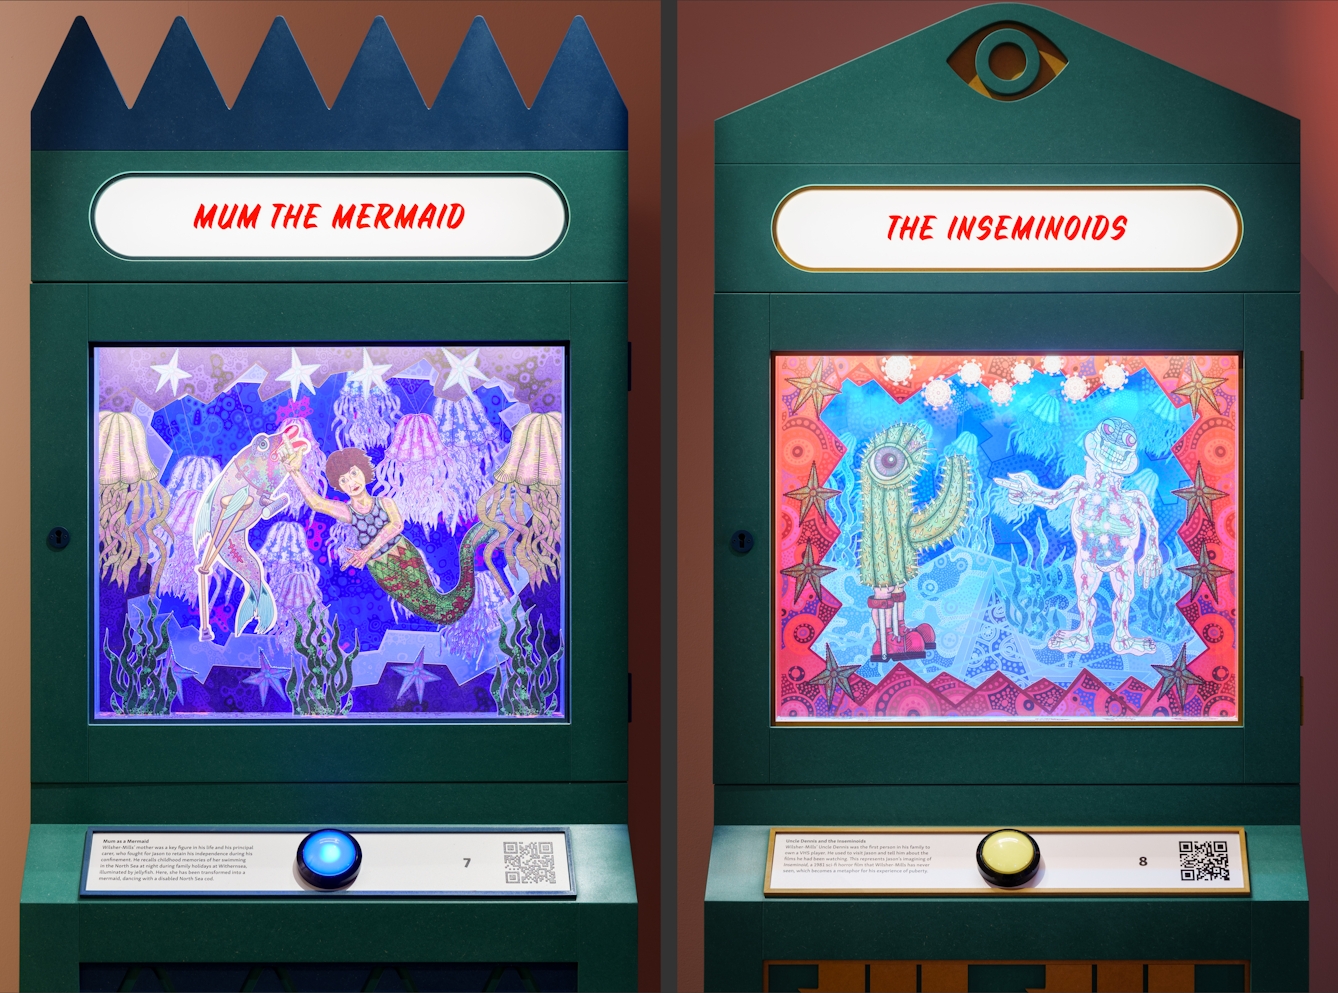 Diptych of two exhibition exhibits. The exhibits resemble an arcade machine with a large button on the front and a large glass fronted diorama, inside which are multi-layered theatre style scenes containing colourful drawings of characters and scenery. The exhibit on the left has the backlit title, 'Mum the Mermaid' and on he right, 'The Inseminoids'.